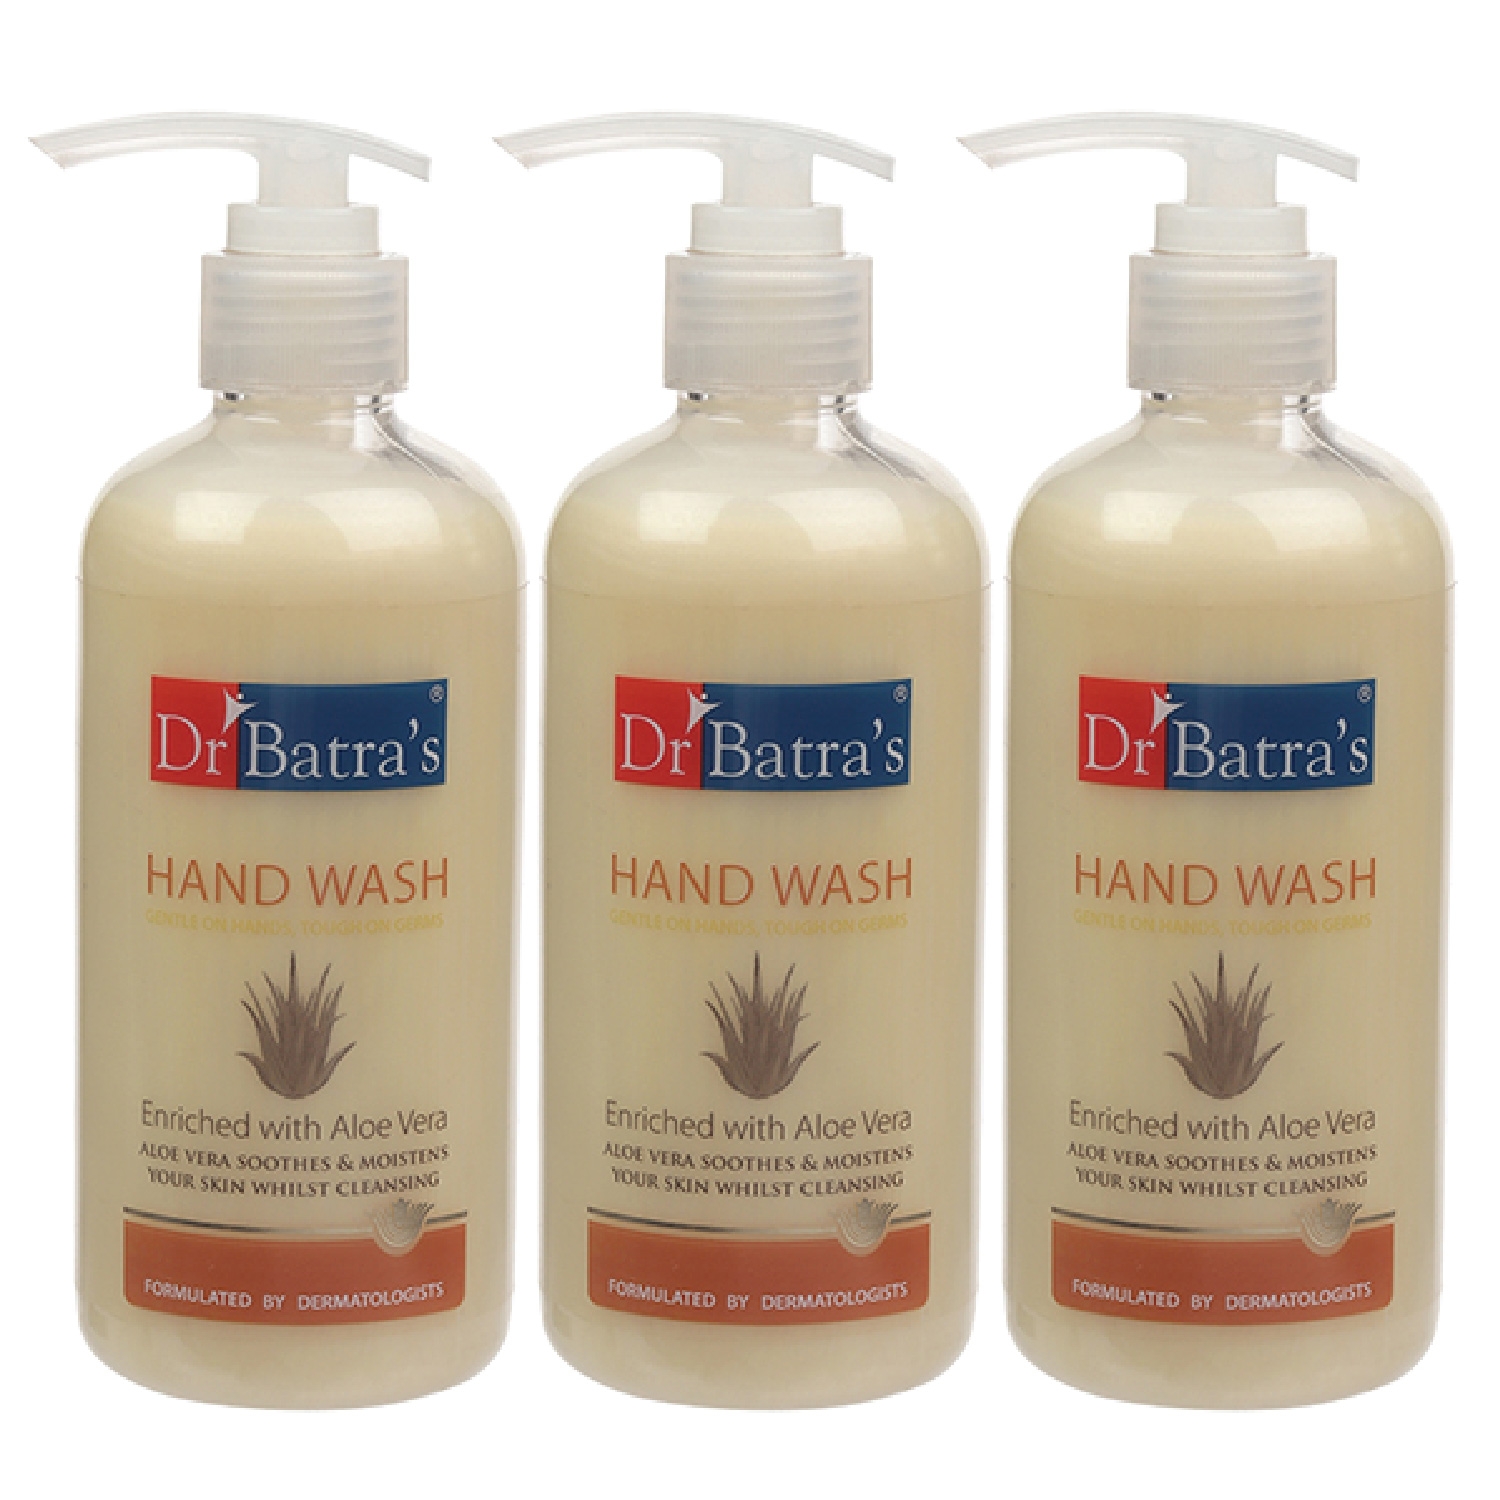 Dr Batra's | Dr Batra's Hand Wash|Aloe Vera|10x Better Protection Against Germs - 300 ml (Pack of 3)